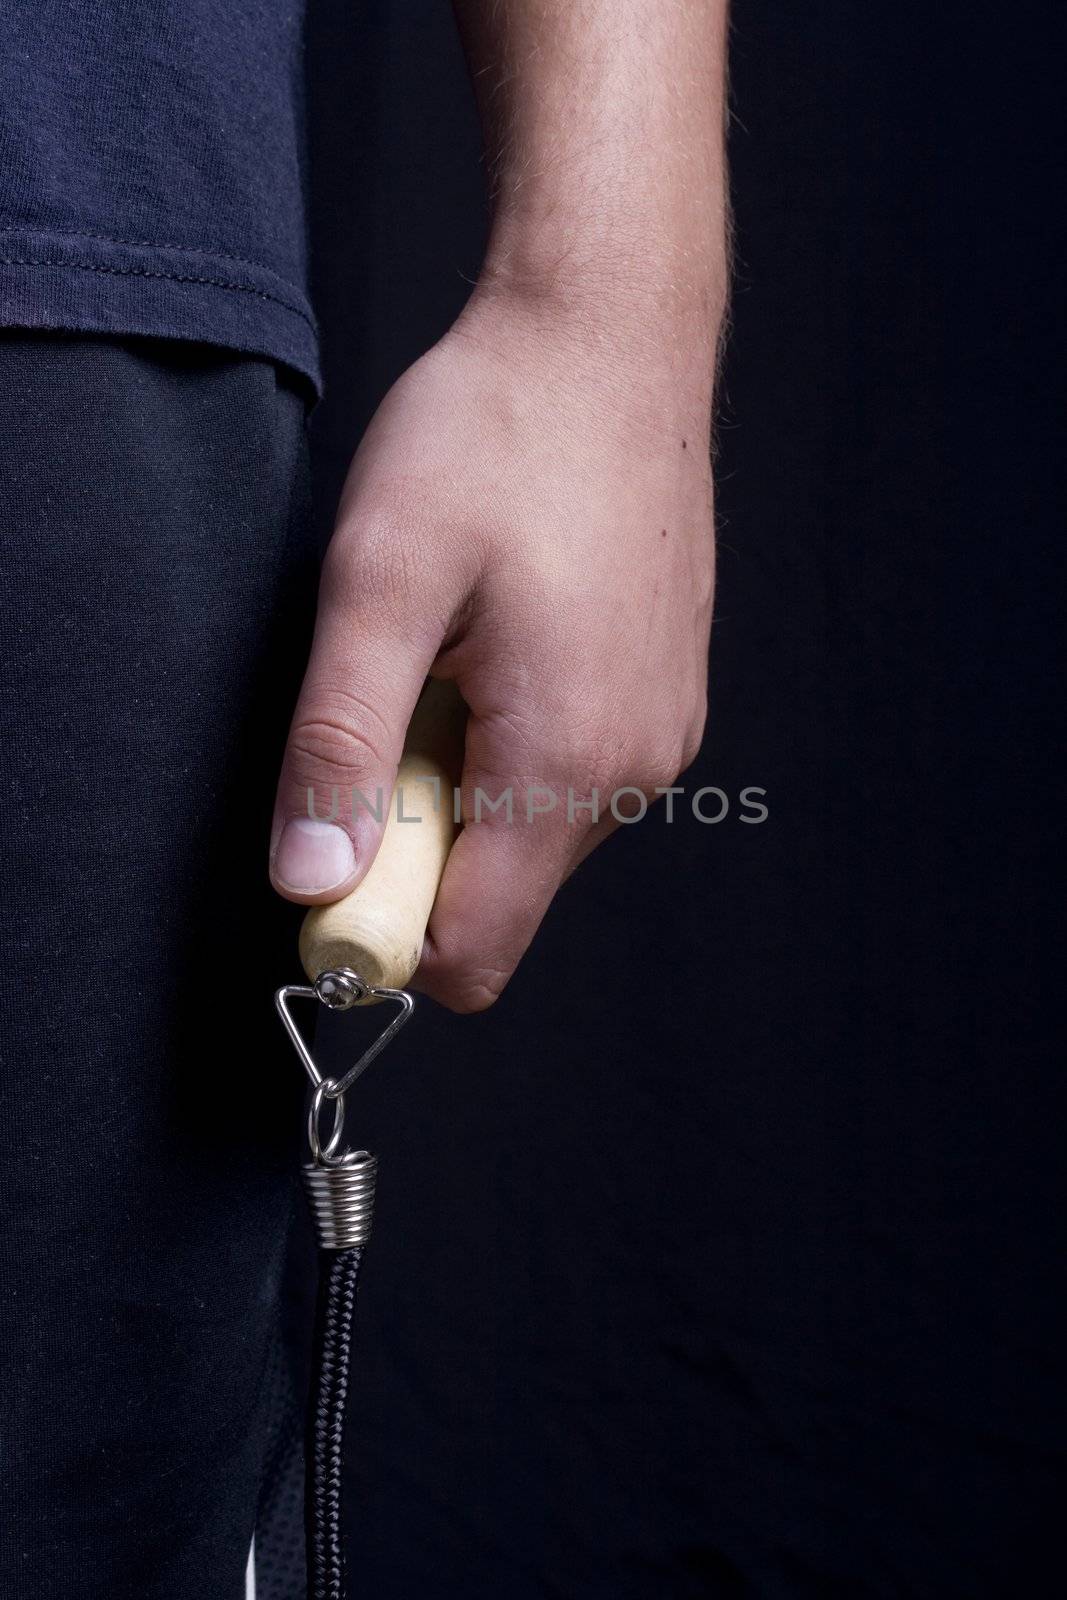 Human hand holding a jump rope on a black background.